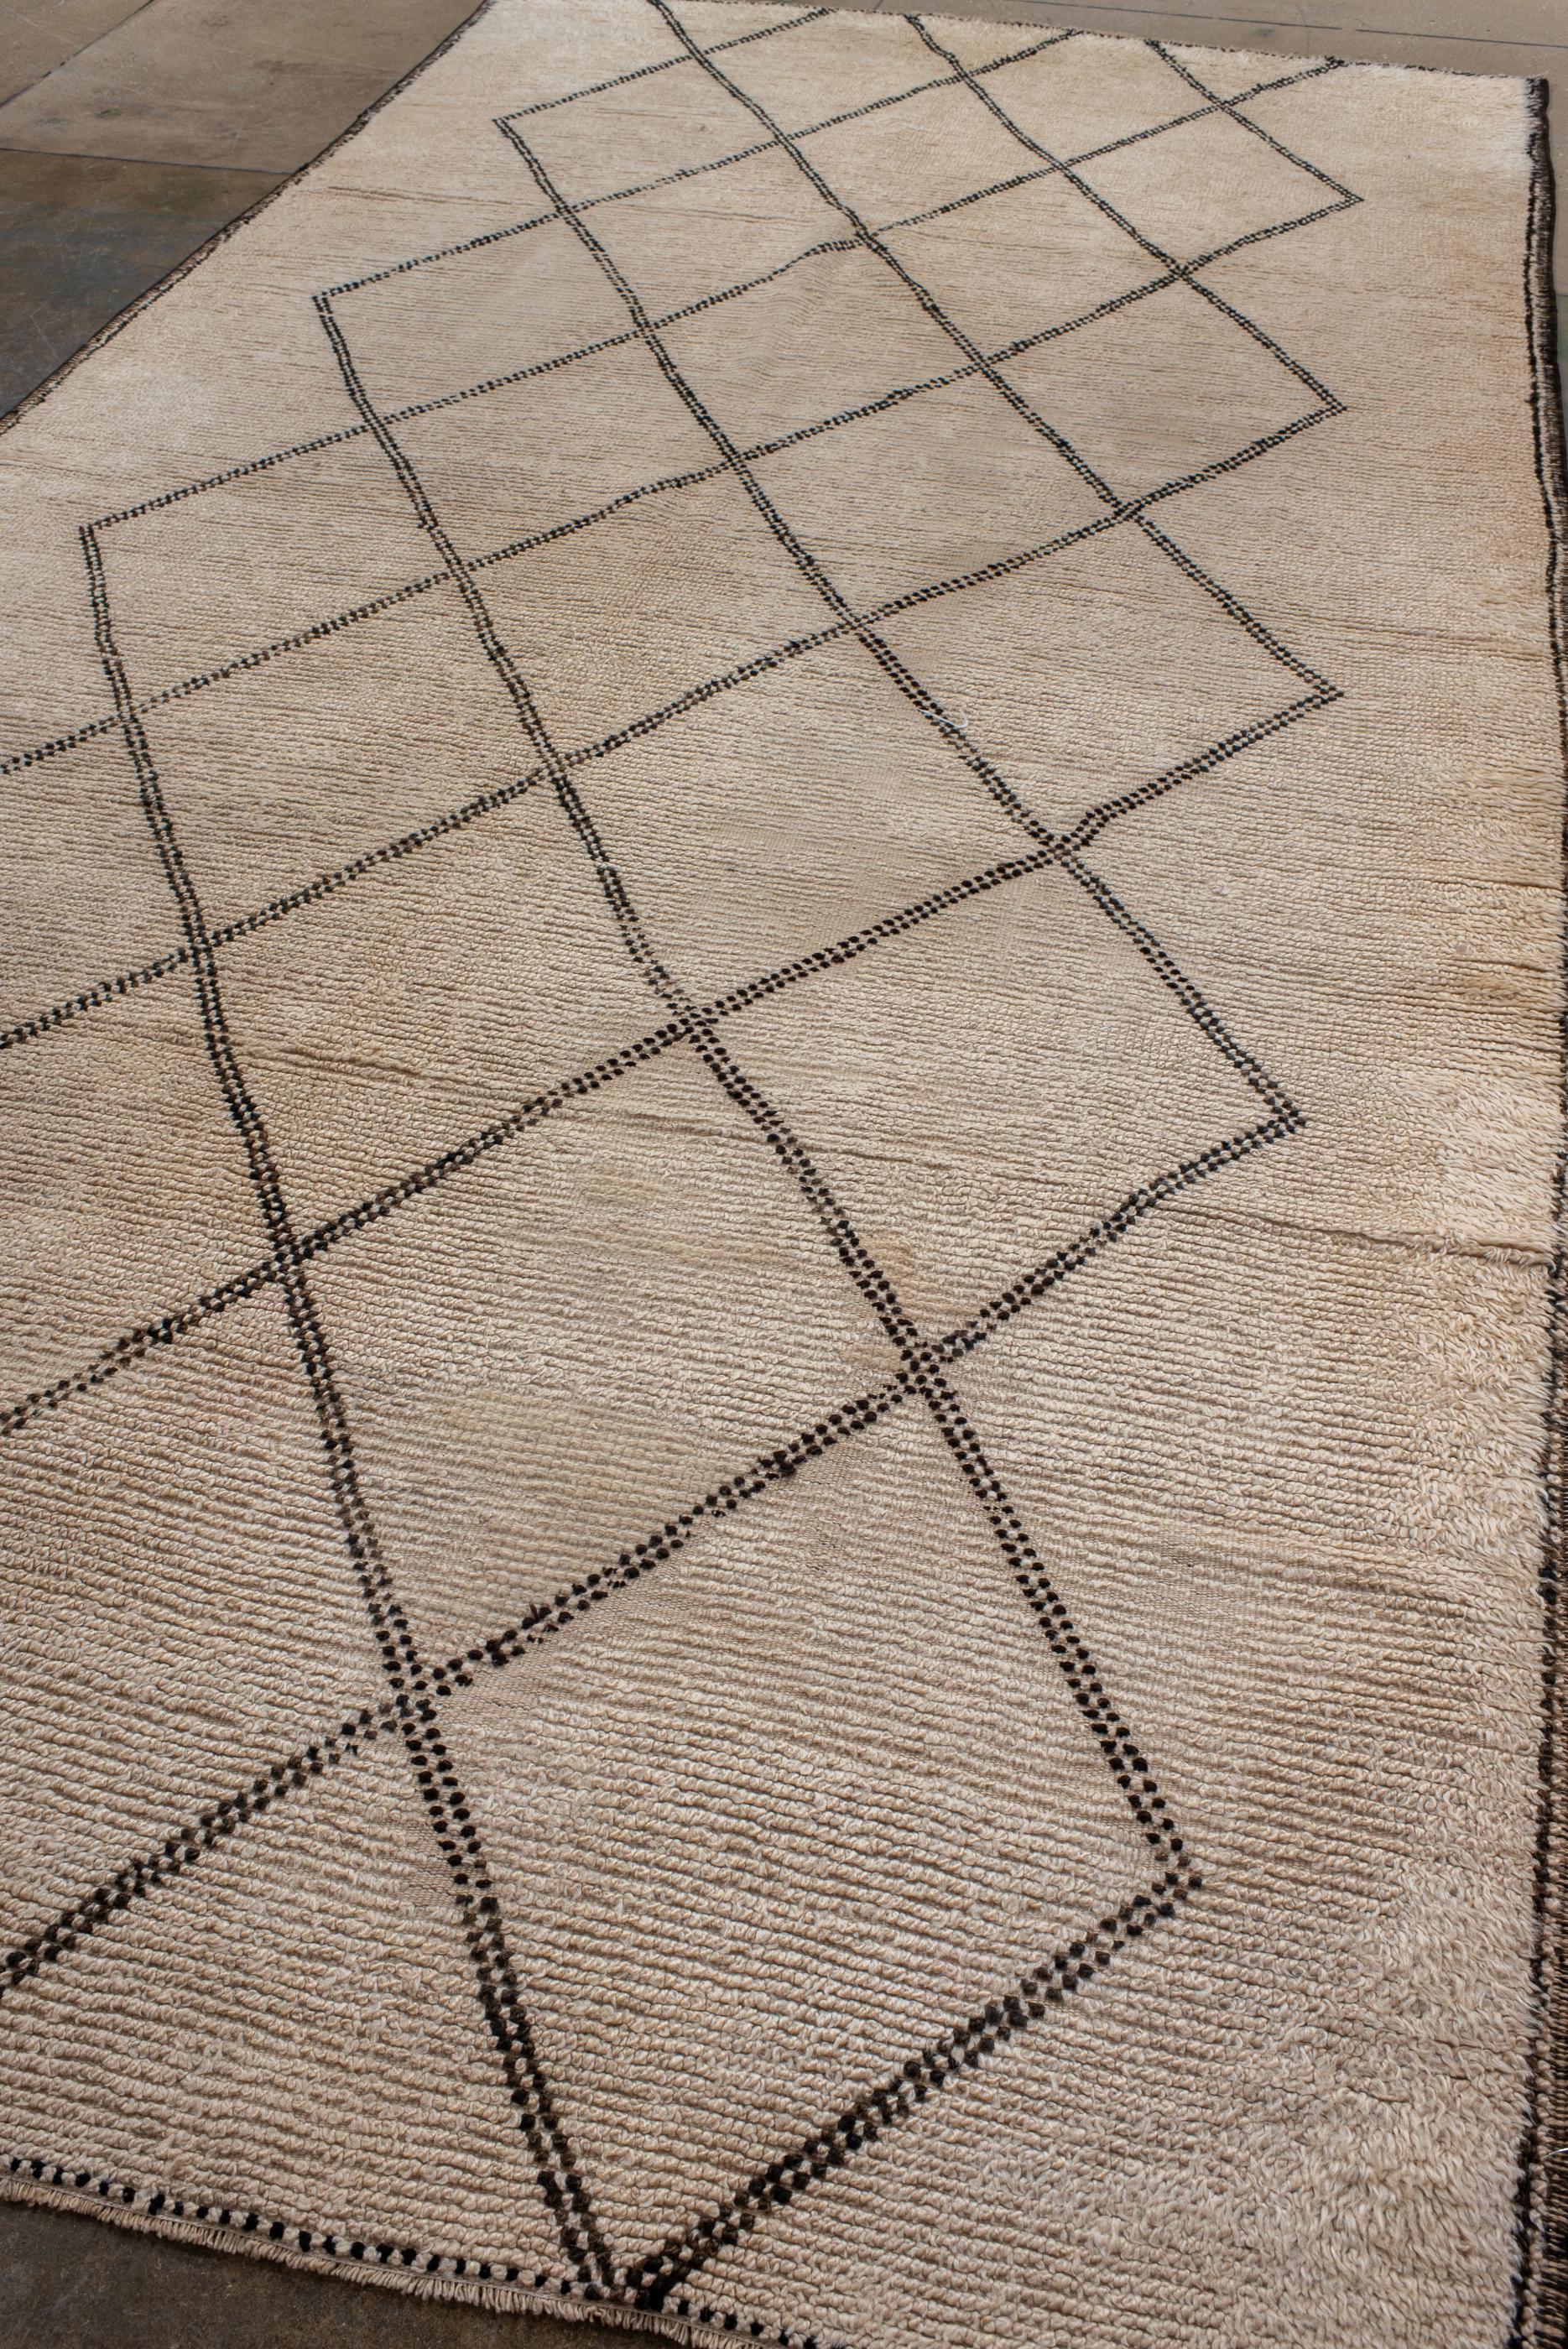 Hand-Knotted Vintage Moroccan Rug with Natural Cream Ground and Simple Side Border